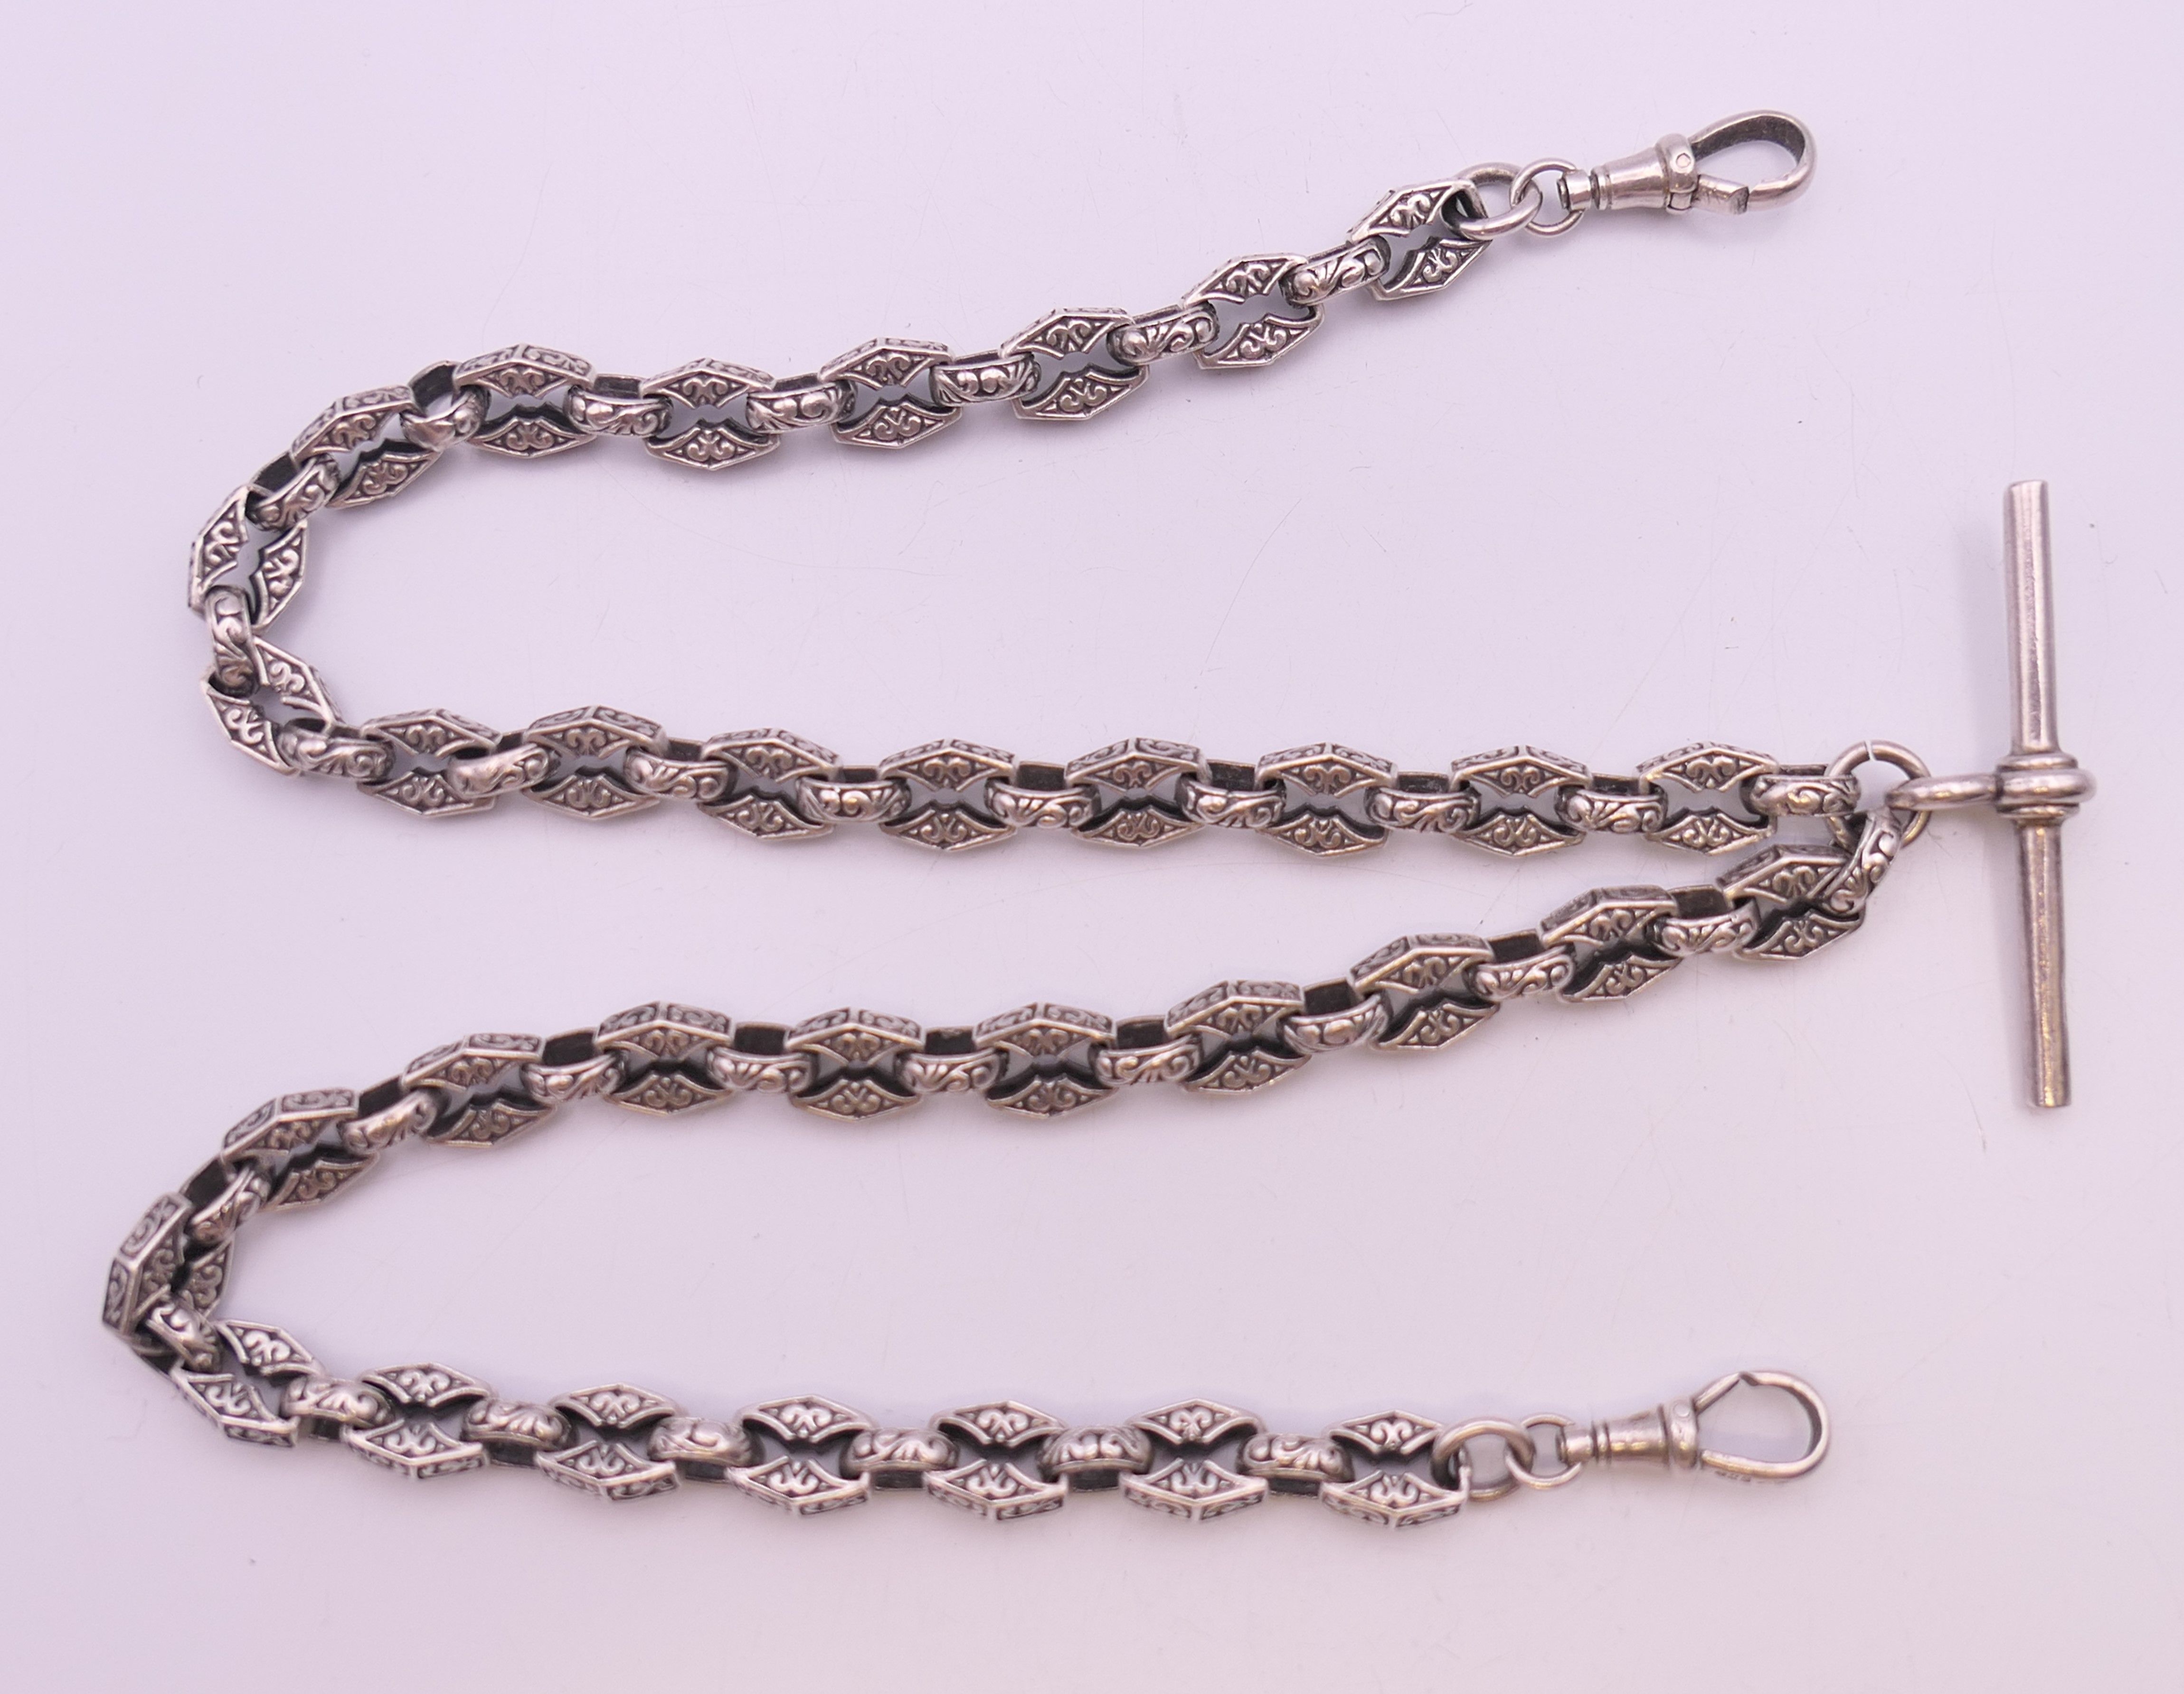 A silver watch chain with patterned links. 49 cm long. 49.1 grammes. - Image 7 of 7